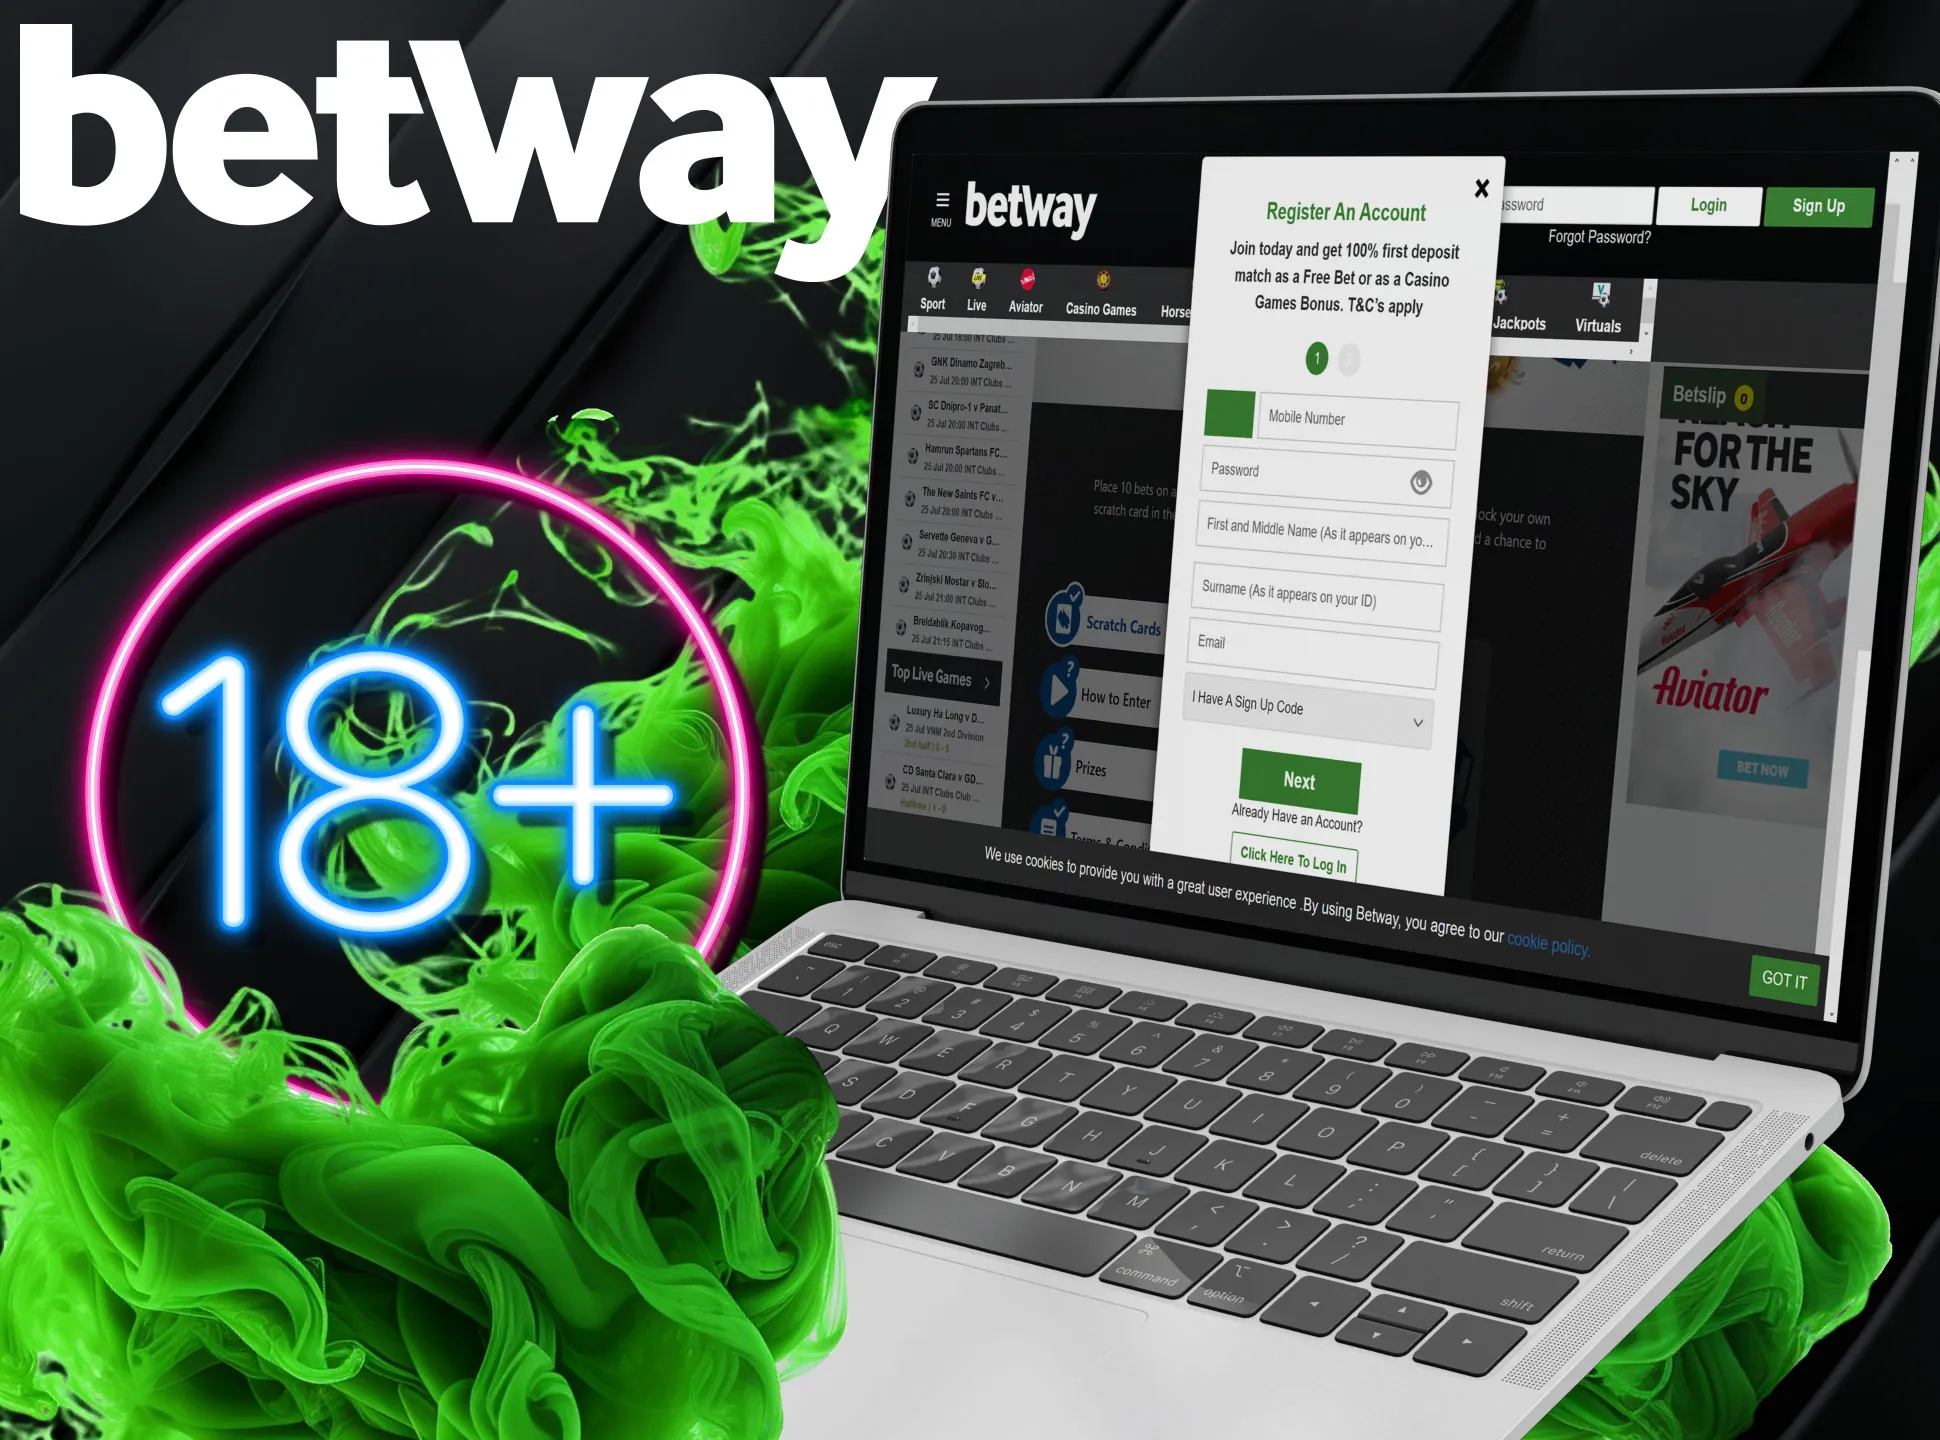 There are some requirements for those who want to create the Betway account.